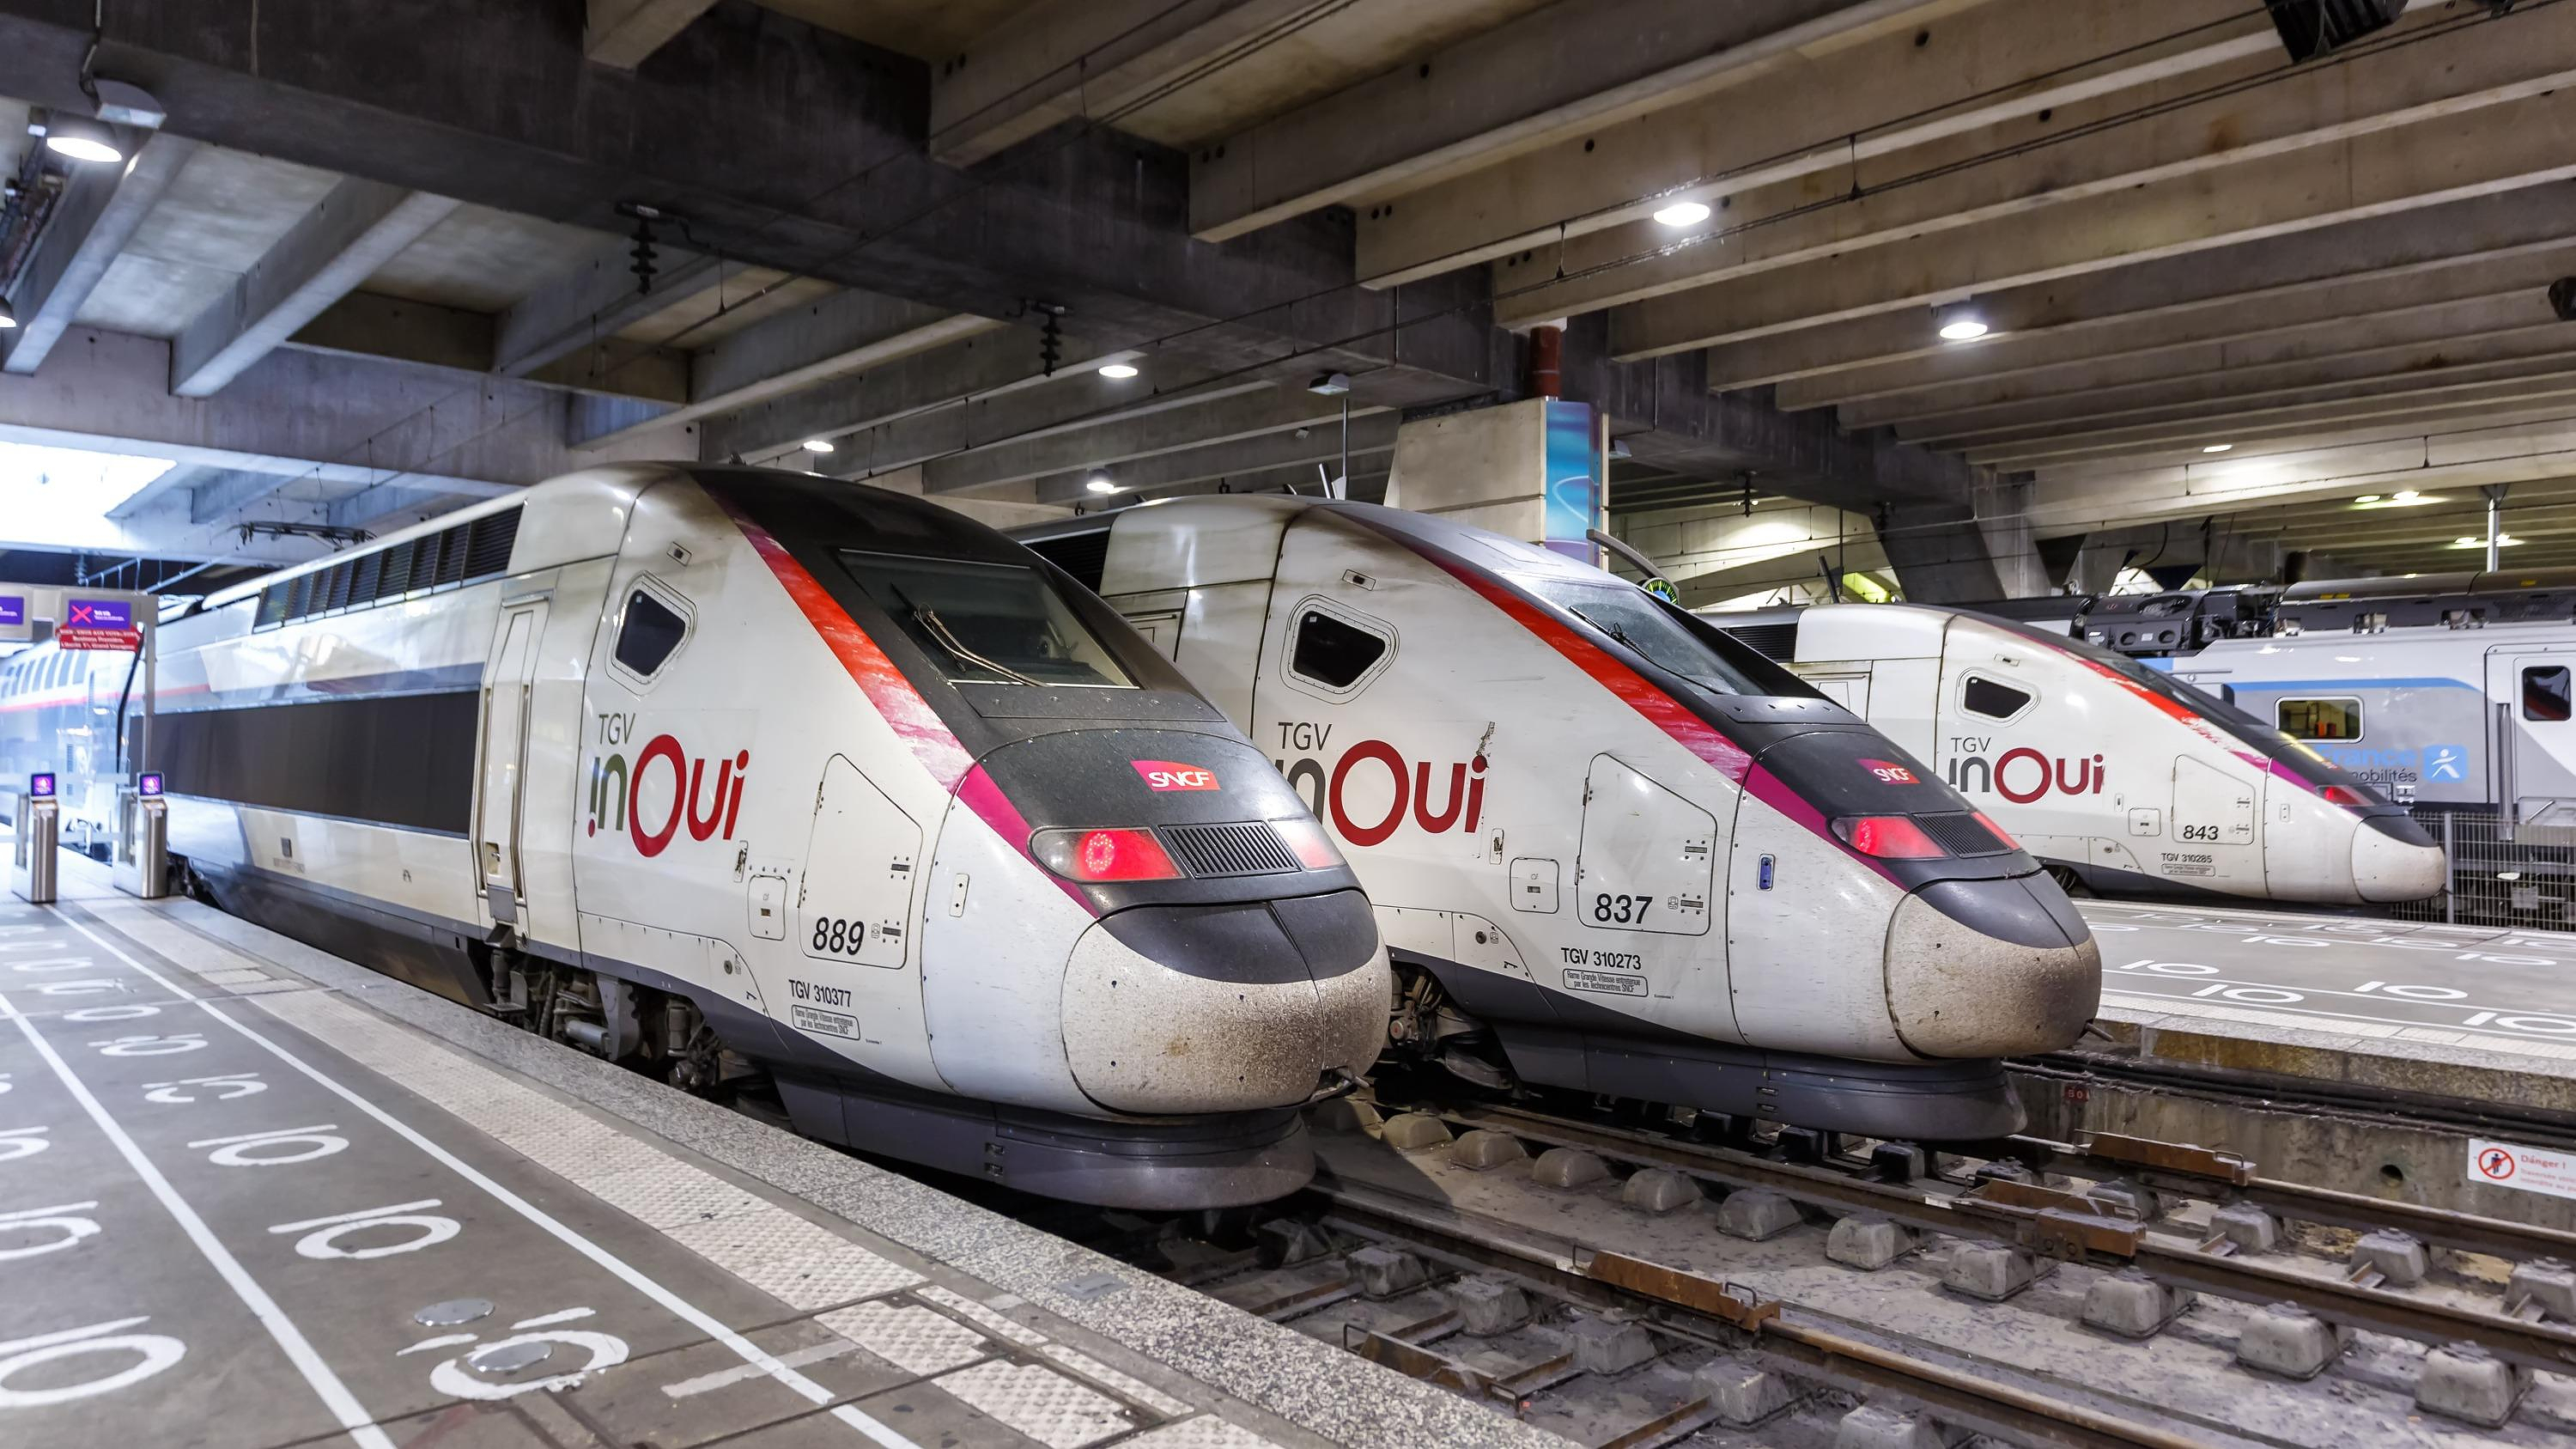 SNCF has increased the ceiling price of tickets with an Avantage card on certain TGV lines